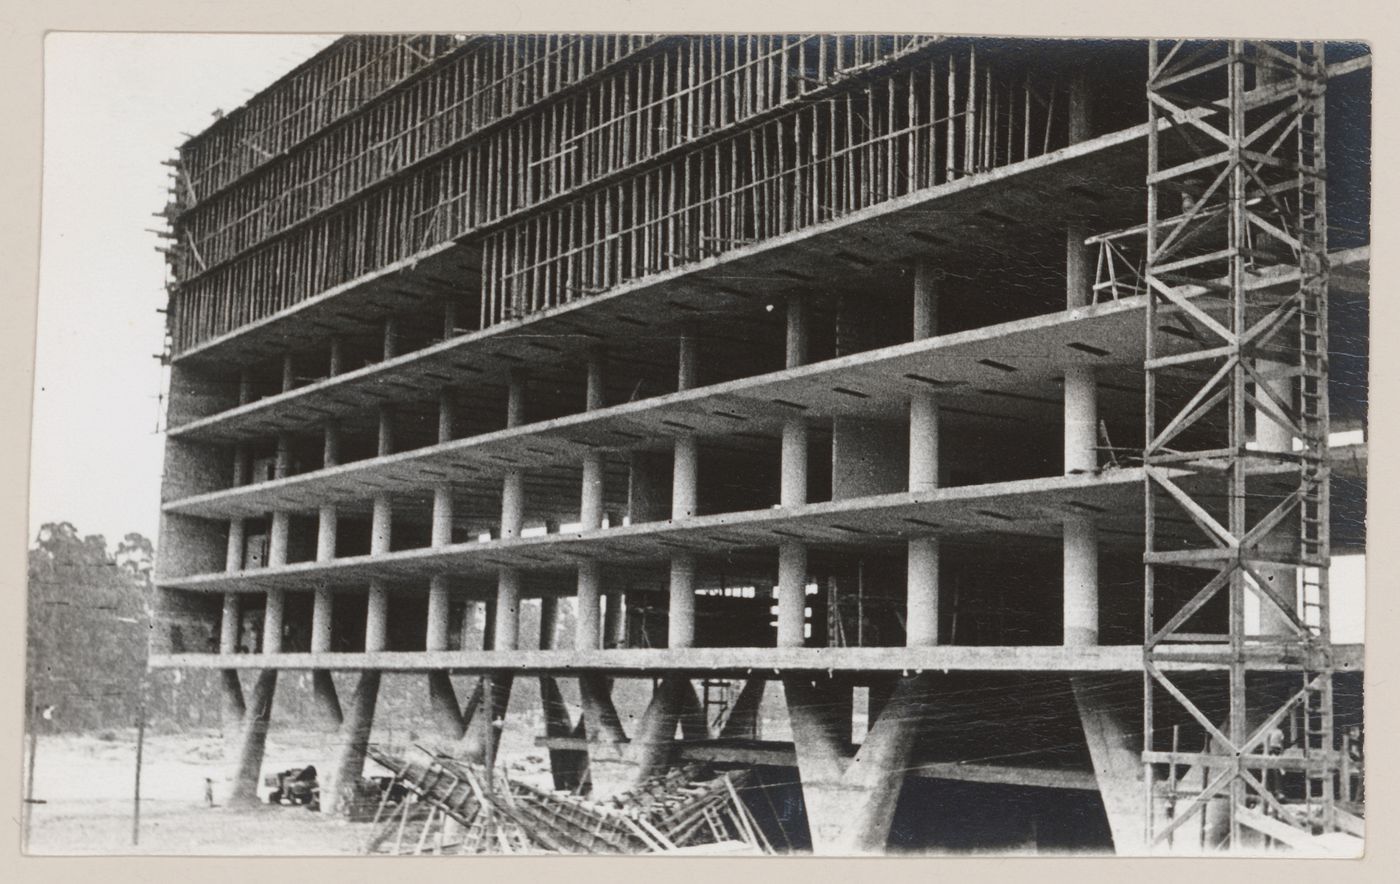 View of Palace of Agriculture, under construction, São Paulo, Brazil
